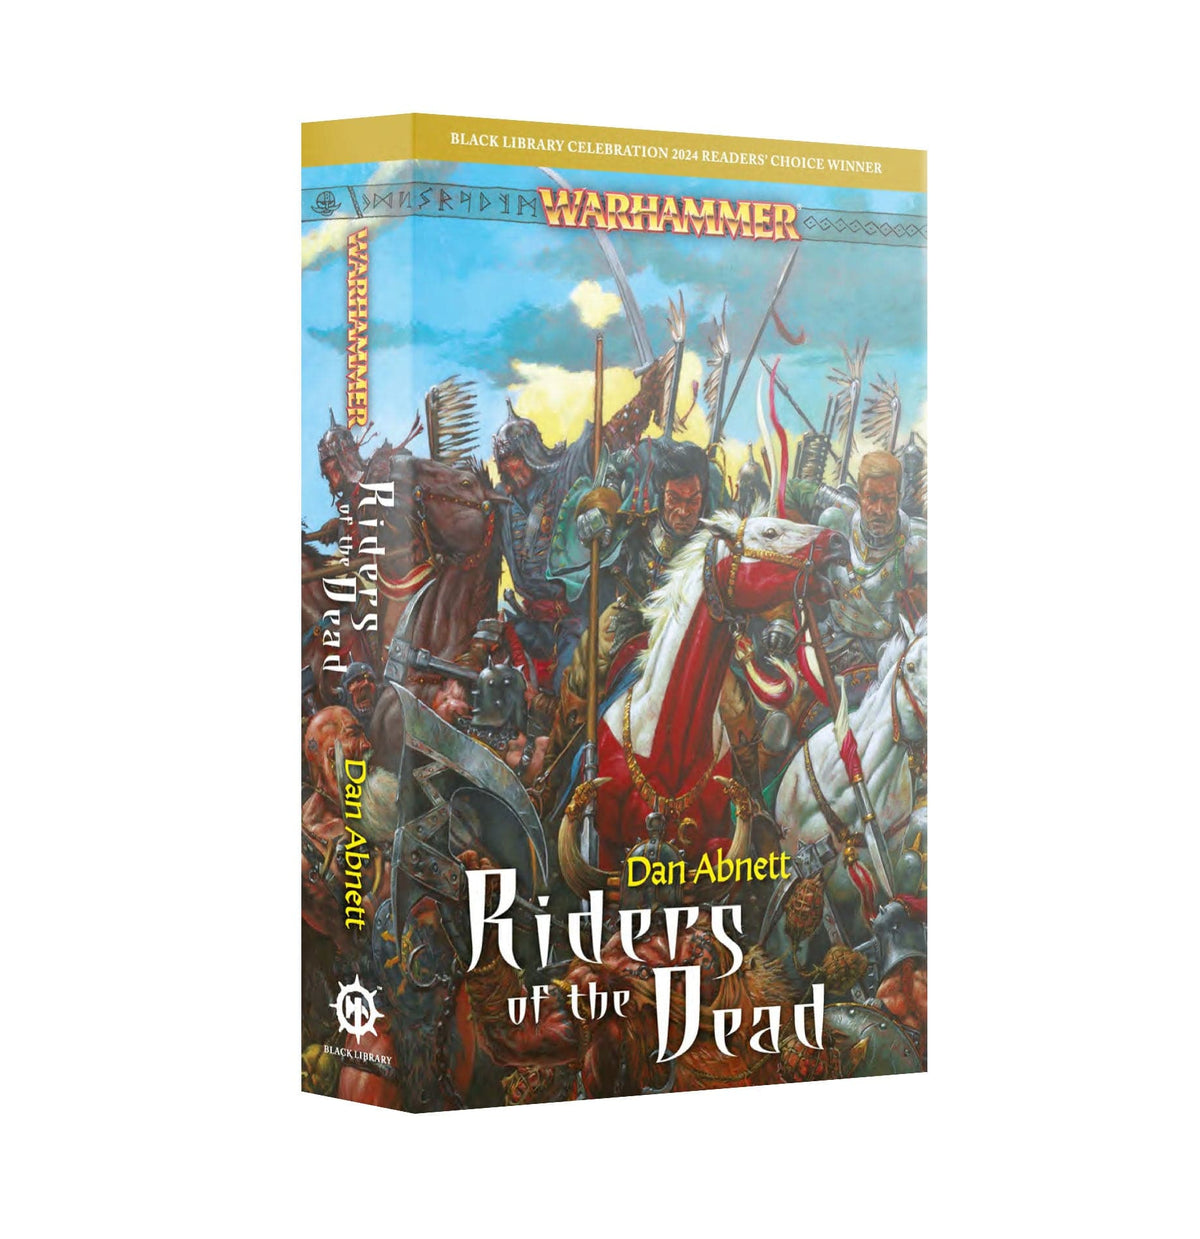 Warhammer Old World - Riders of the Dead Paperback